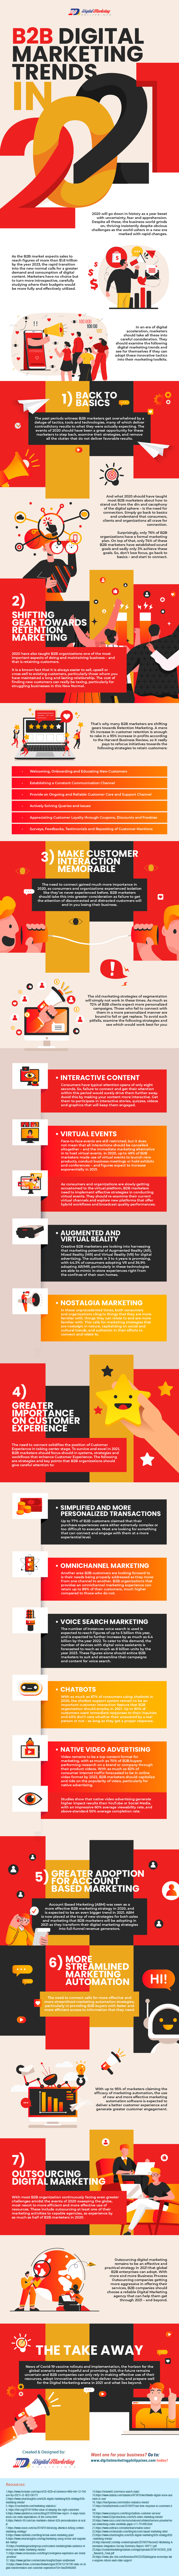 B2B Digital Marketing Trends in 2021 (Infographic) - An Infographic from Digital Marketing Philippines